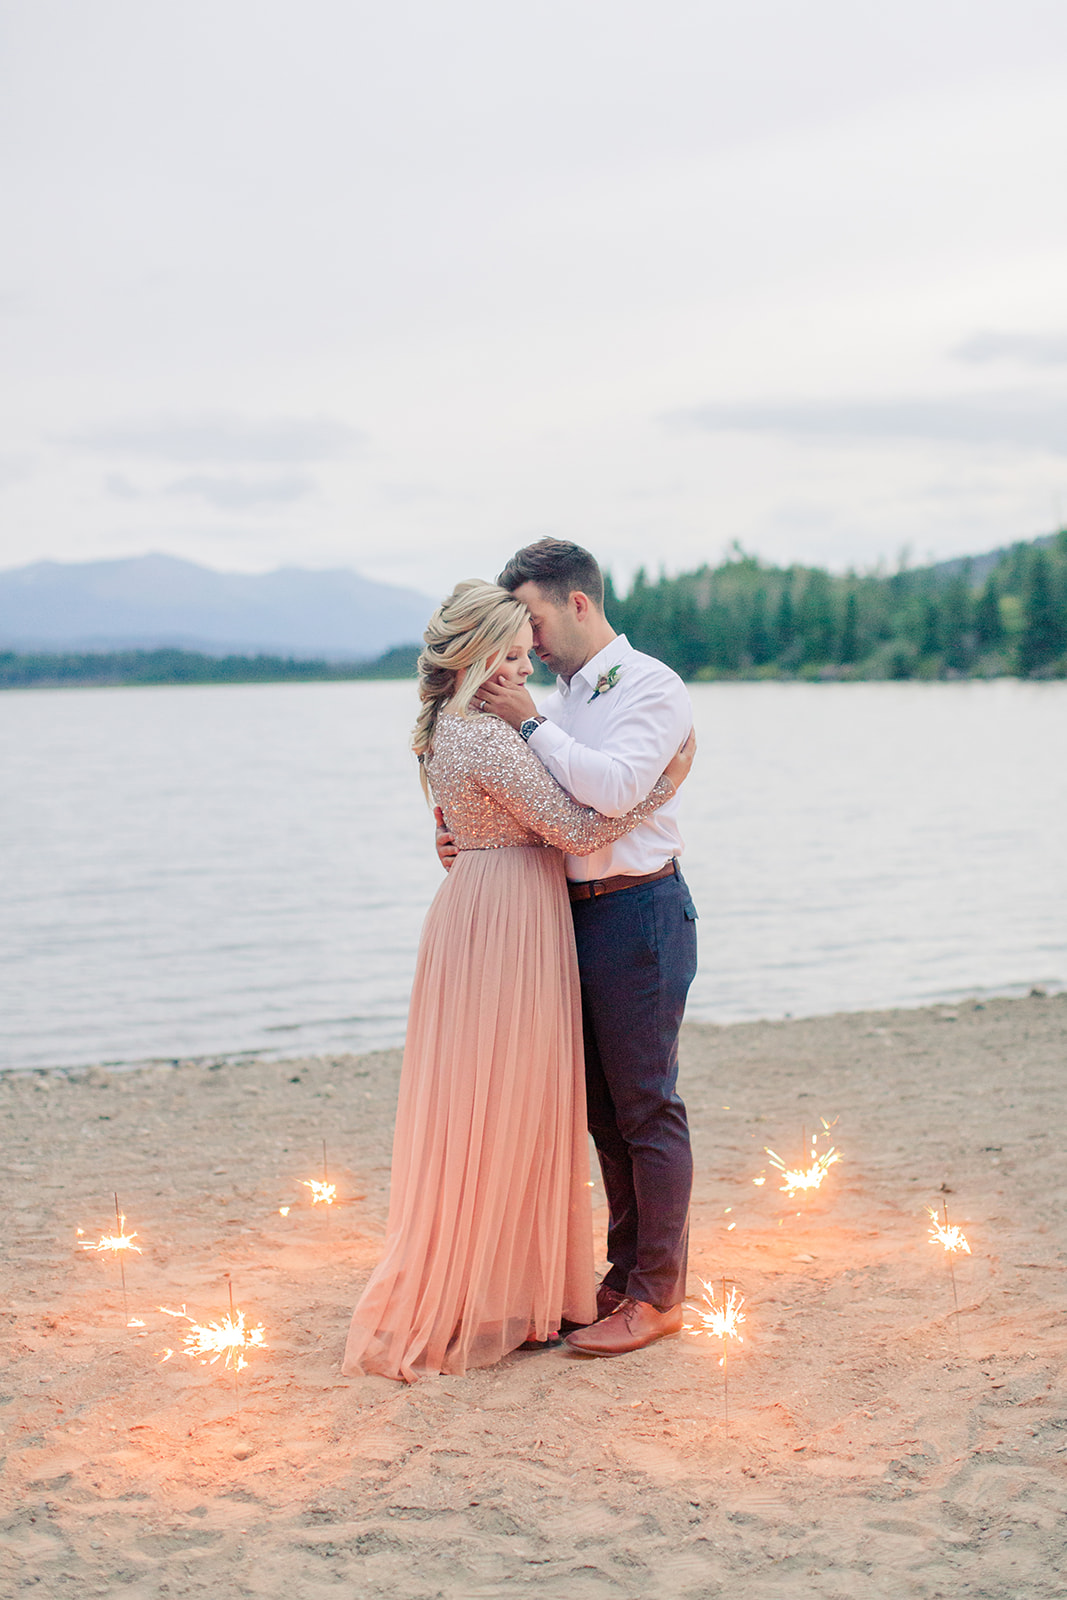 Blush Hues and Sunset Sparklers in this Dreamy Lakeside Elopement Inspiration Featured by Brontë Bride